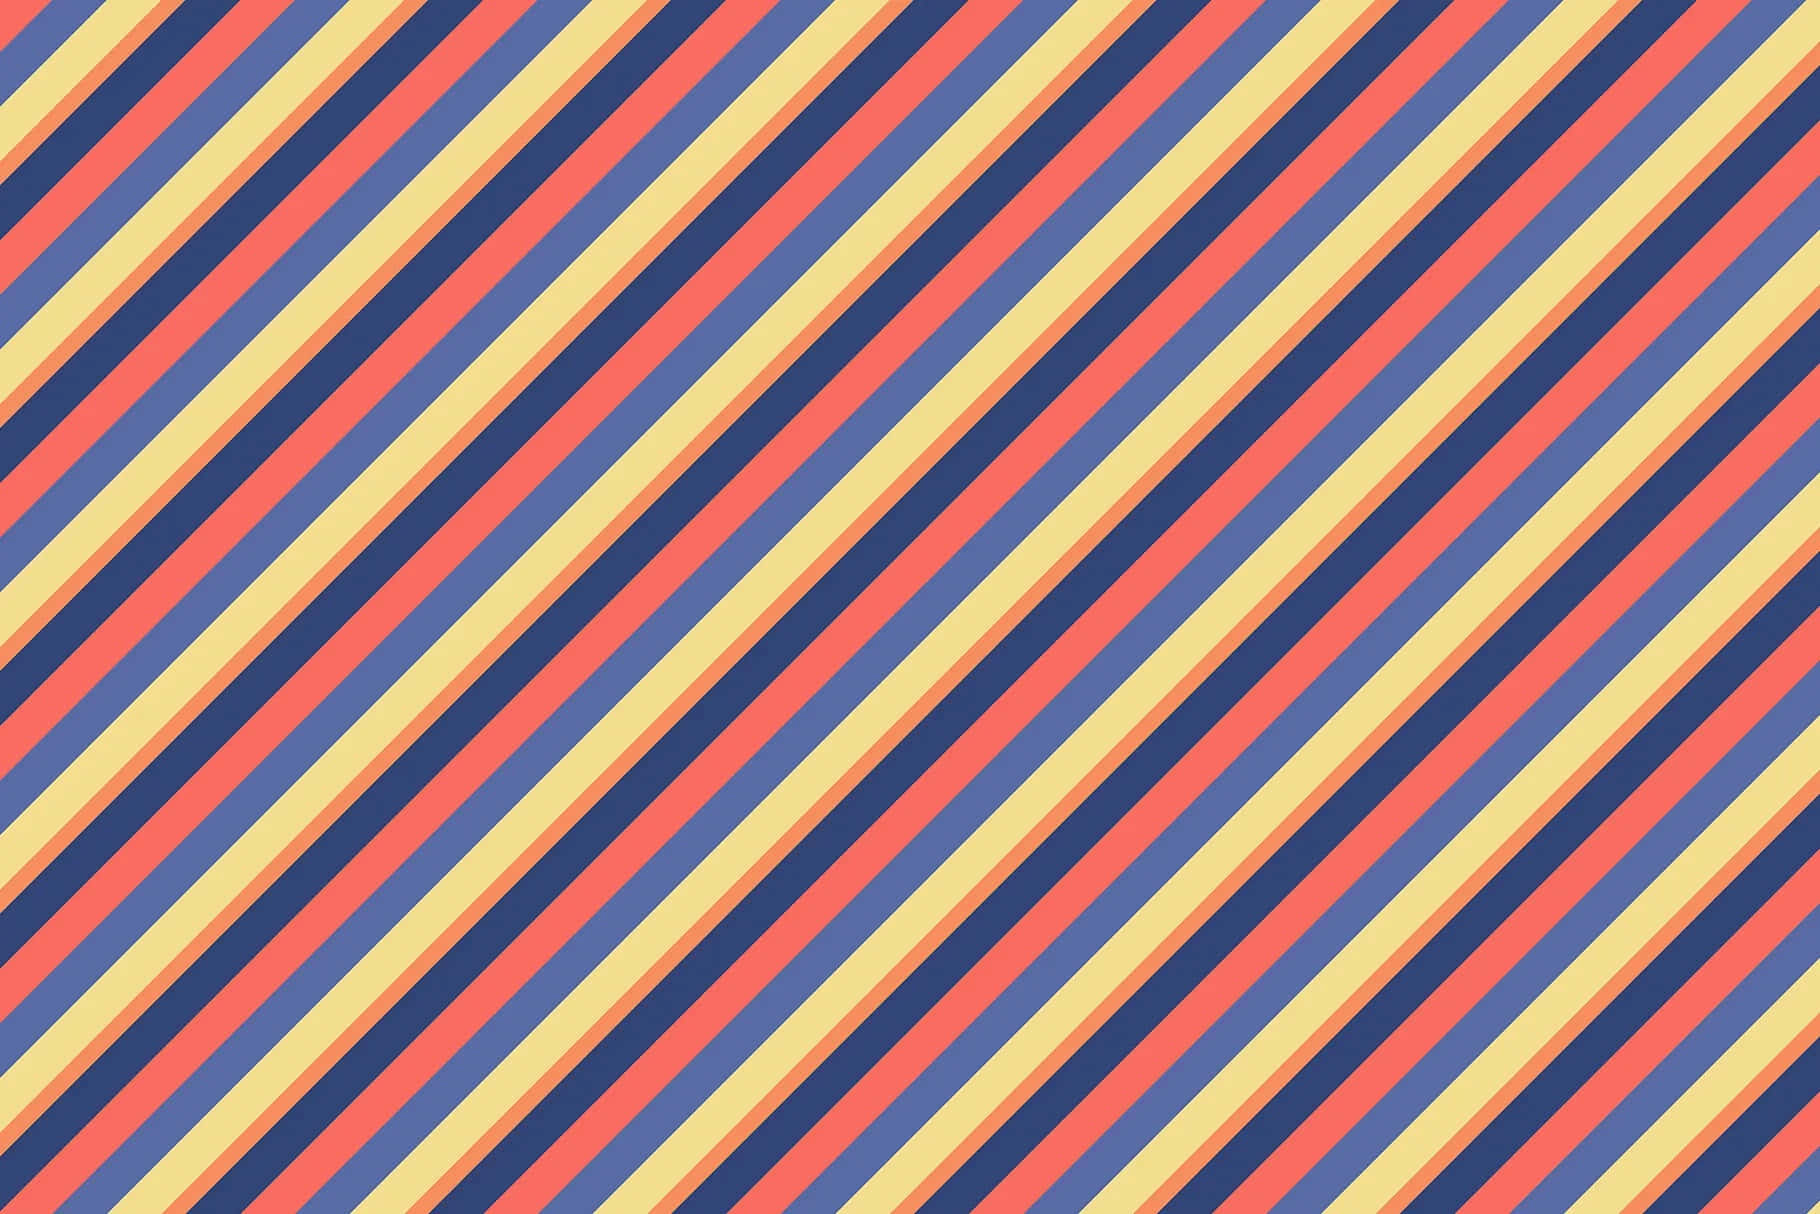 Sweet vibes with Vivid Stripes